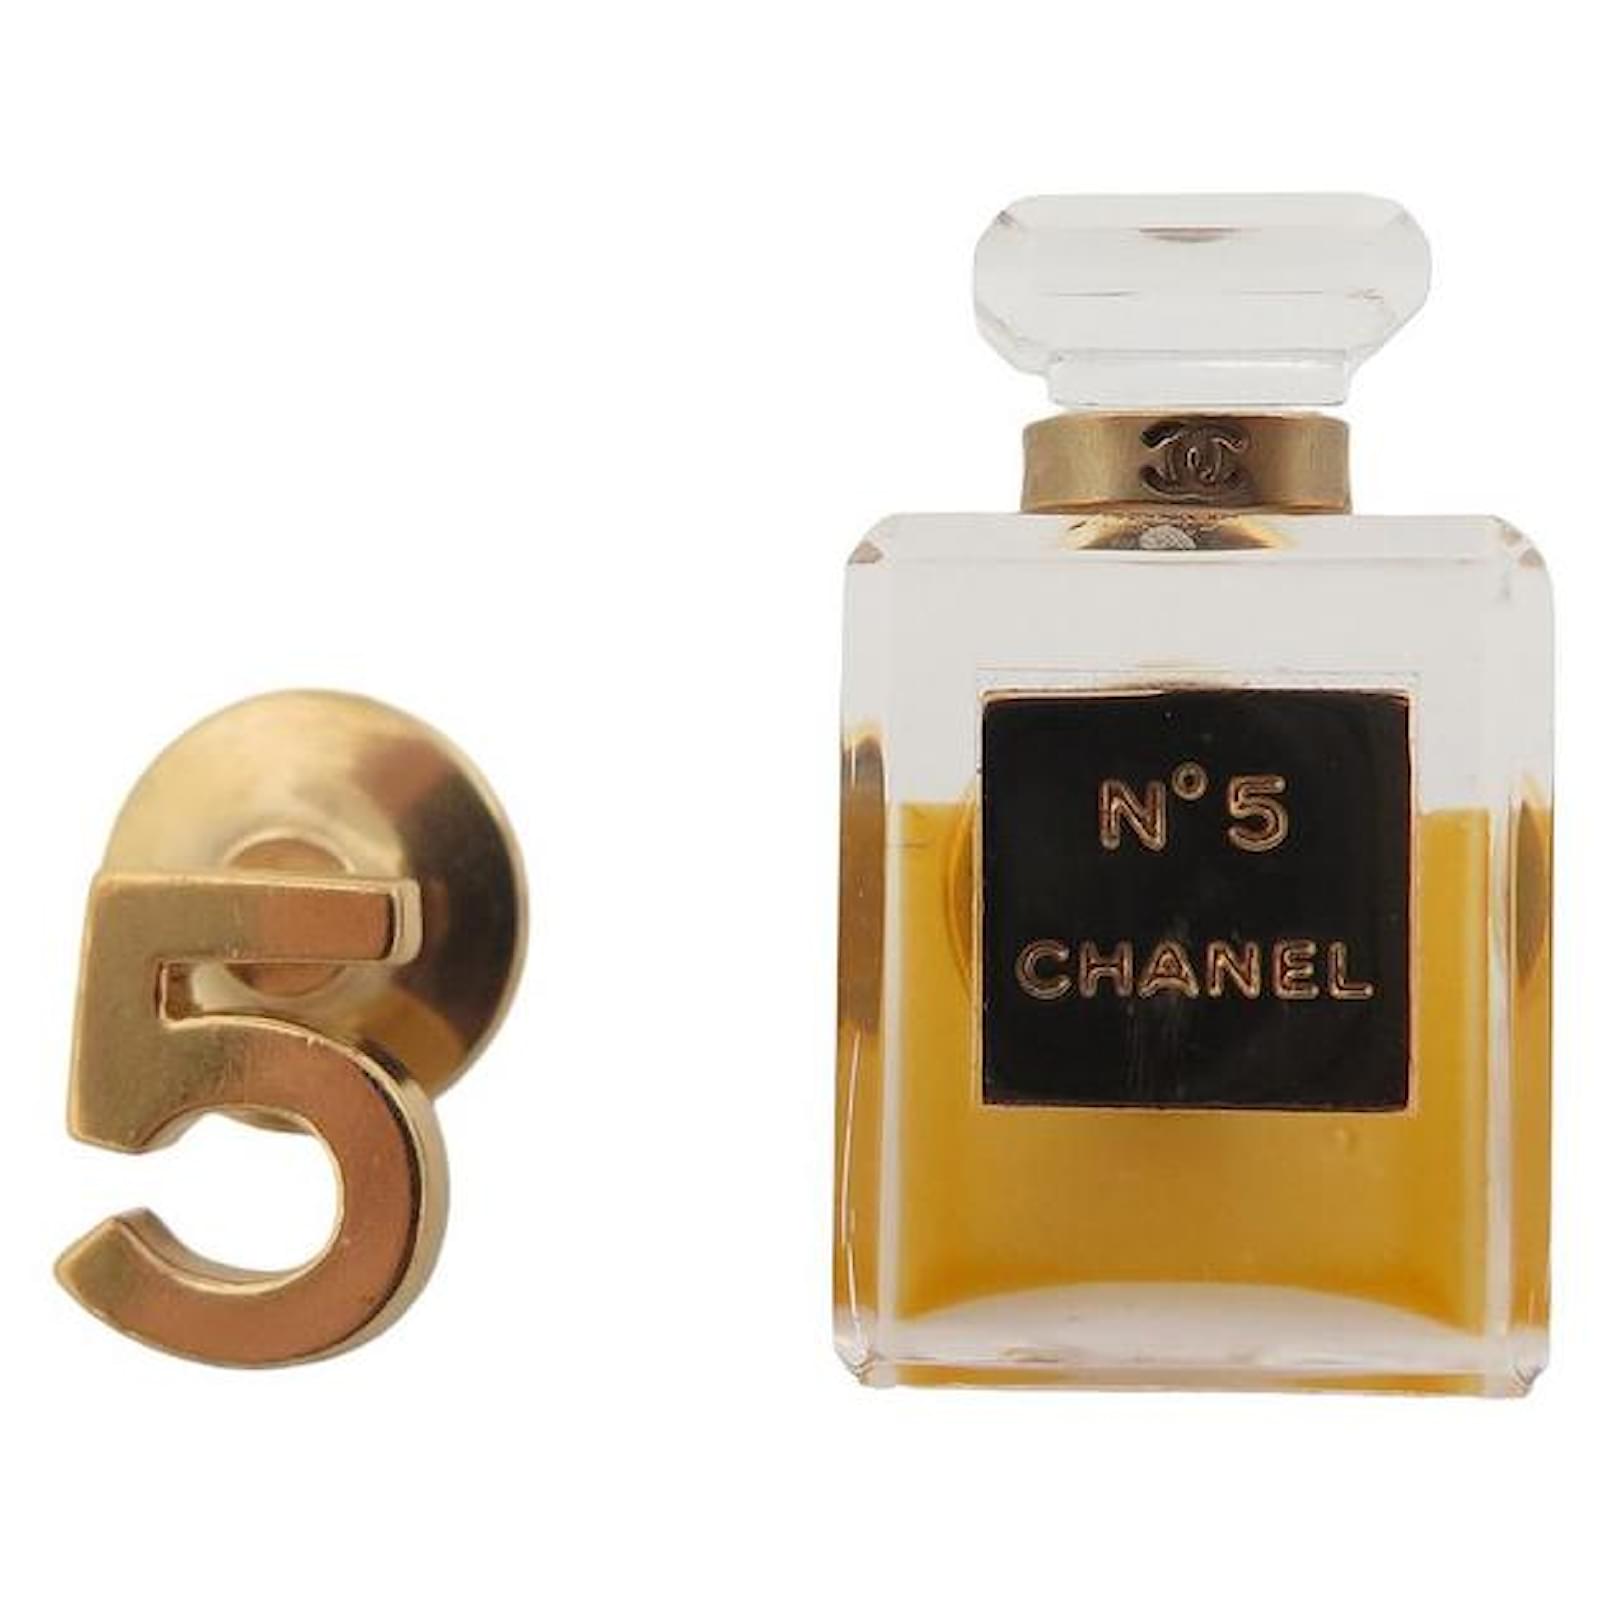 Other Jewelry Chanel Lot of 2 Chanel Bottle Number Pin 5 in Gold Metal Brooches Golden Brooch